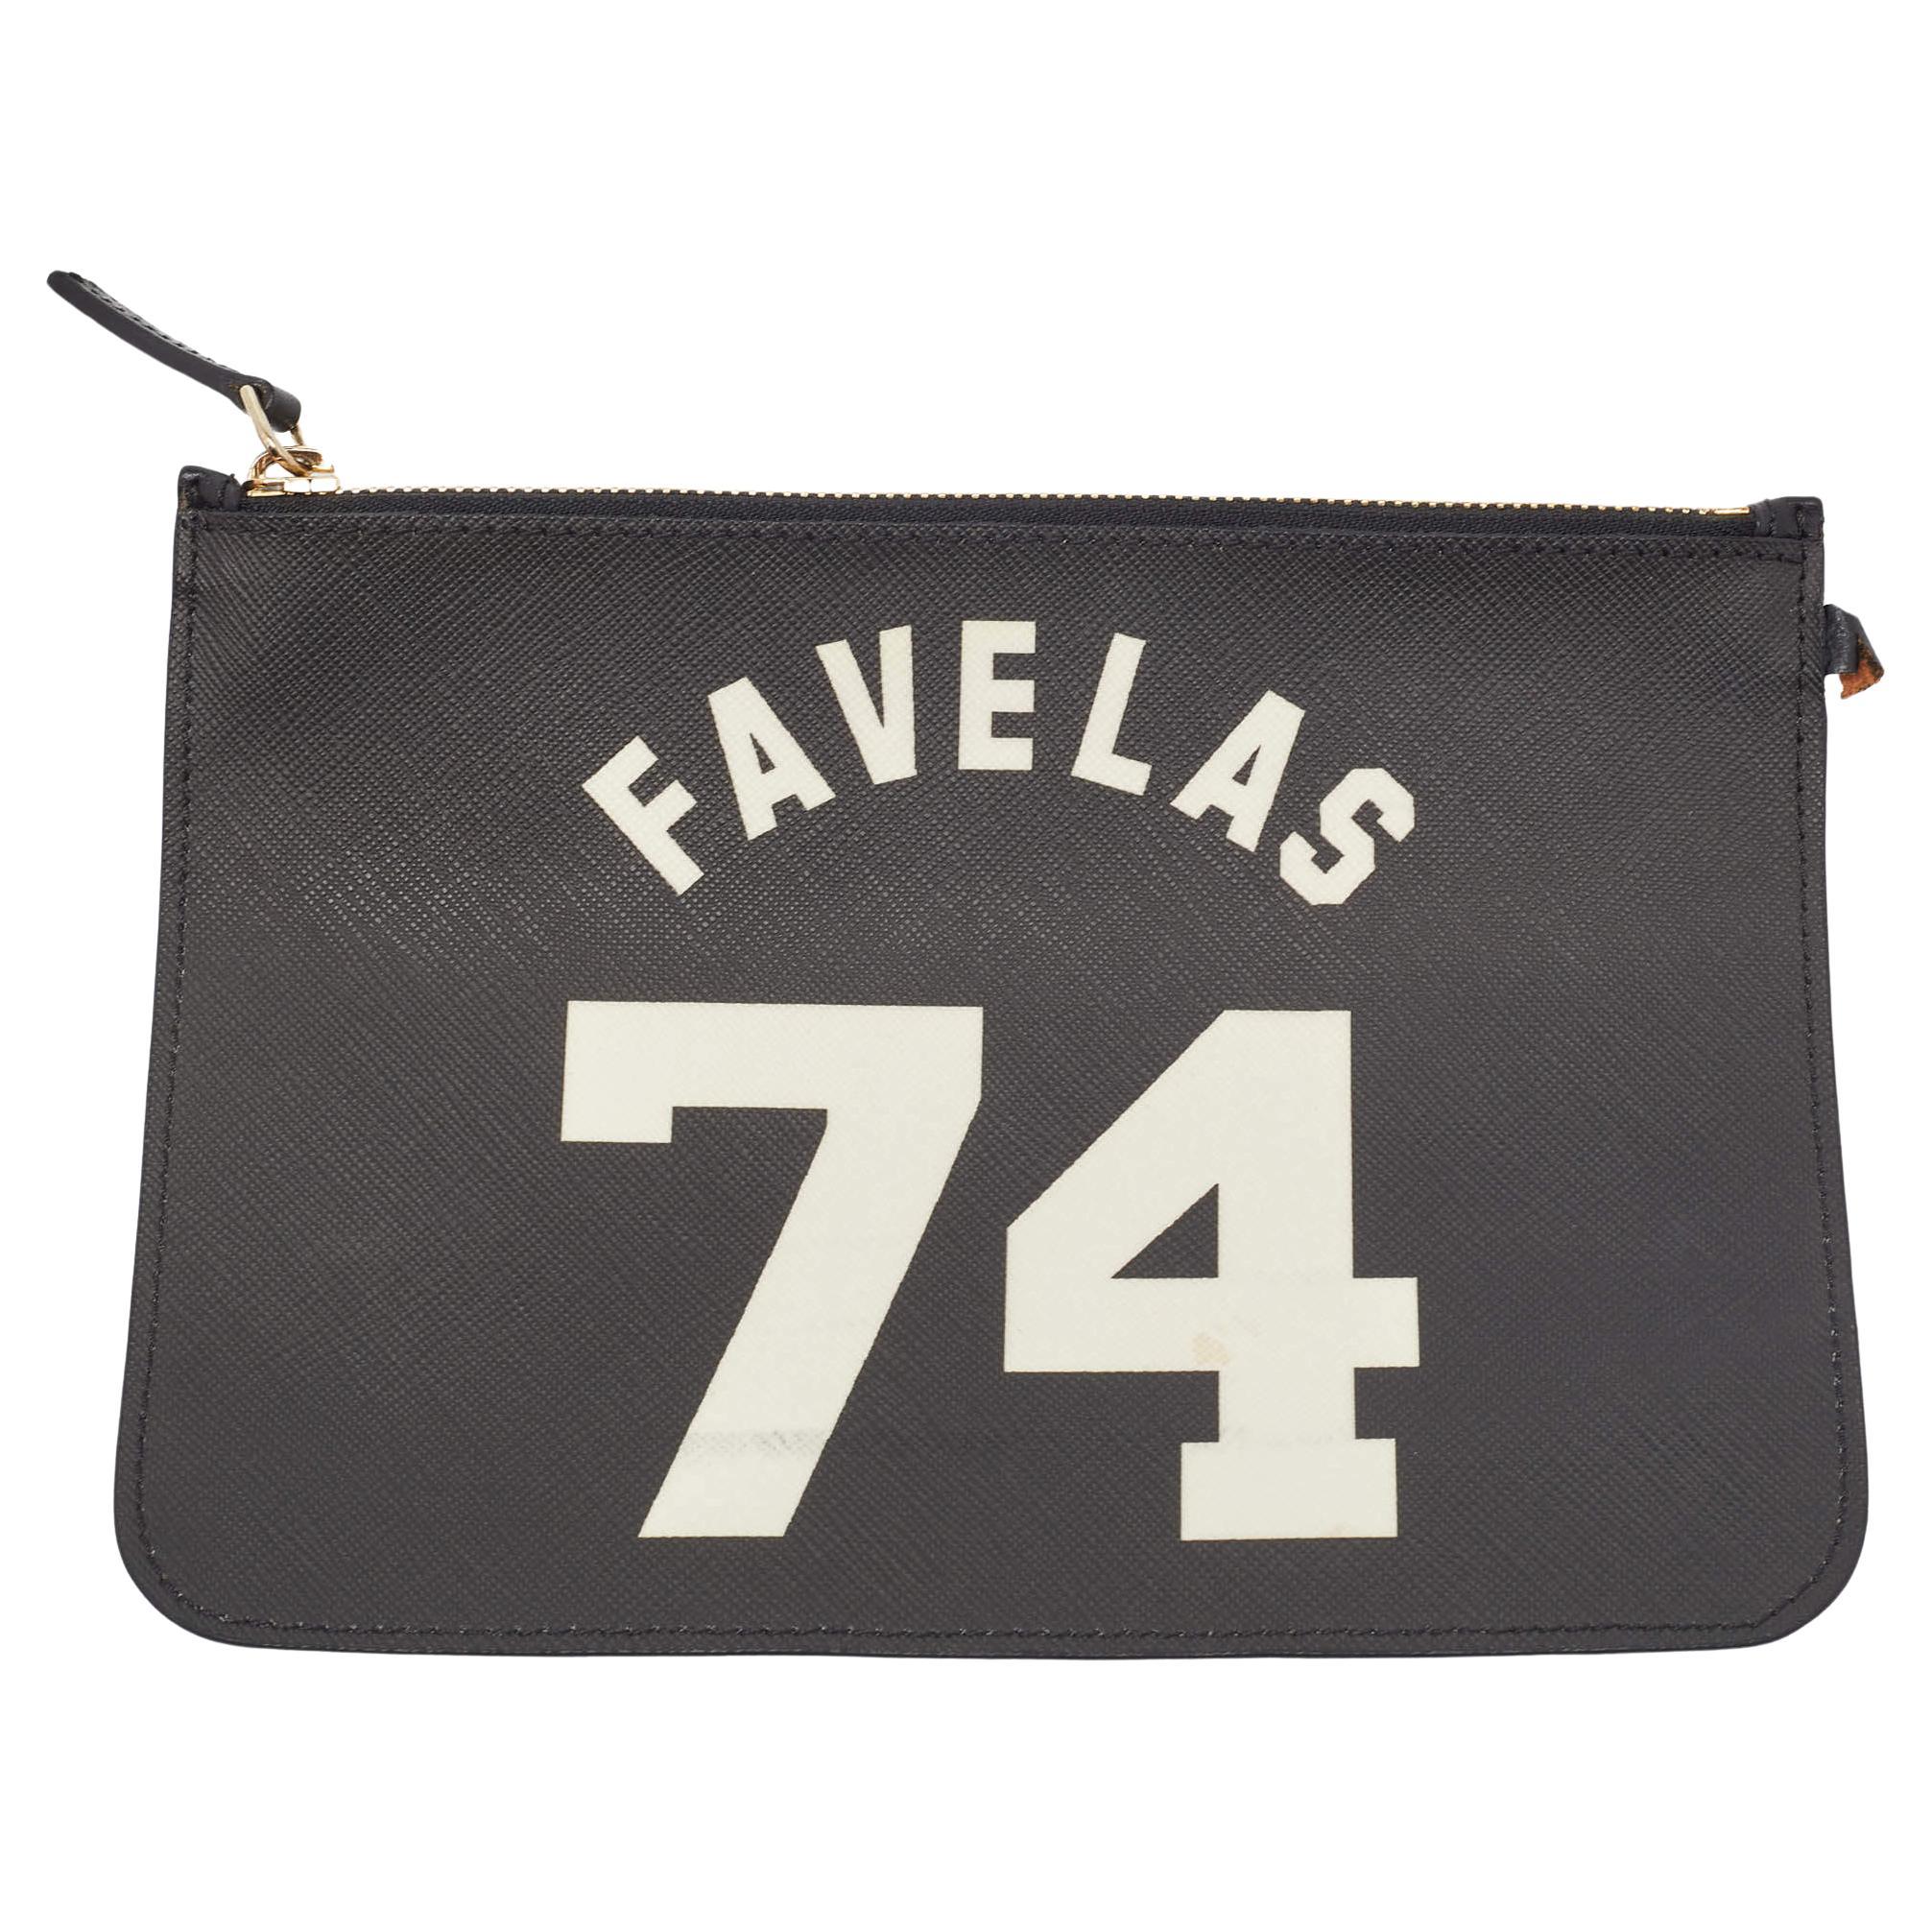 Givenchy Black Coated Canvas and Leather Favelas 74 Shopper Tote